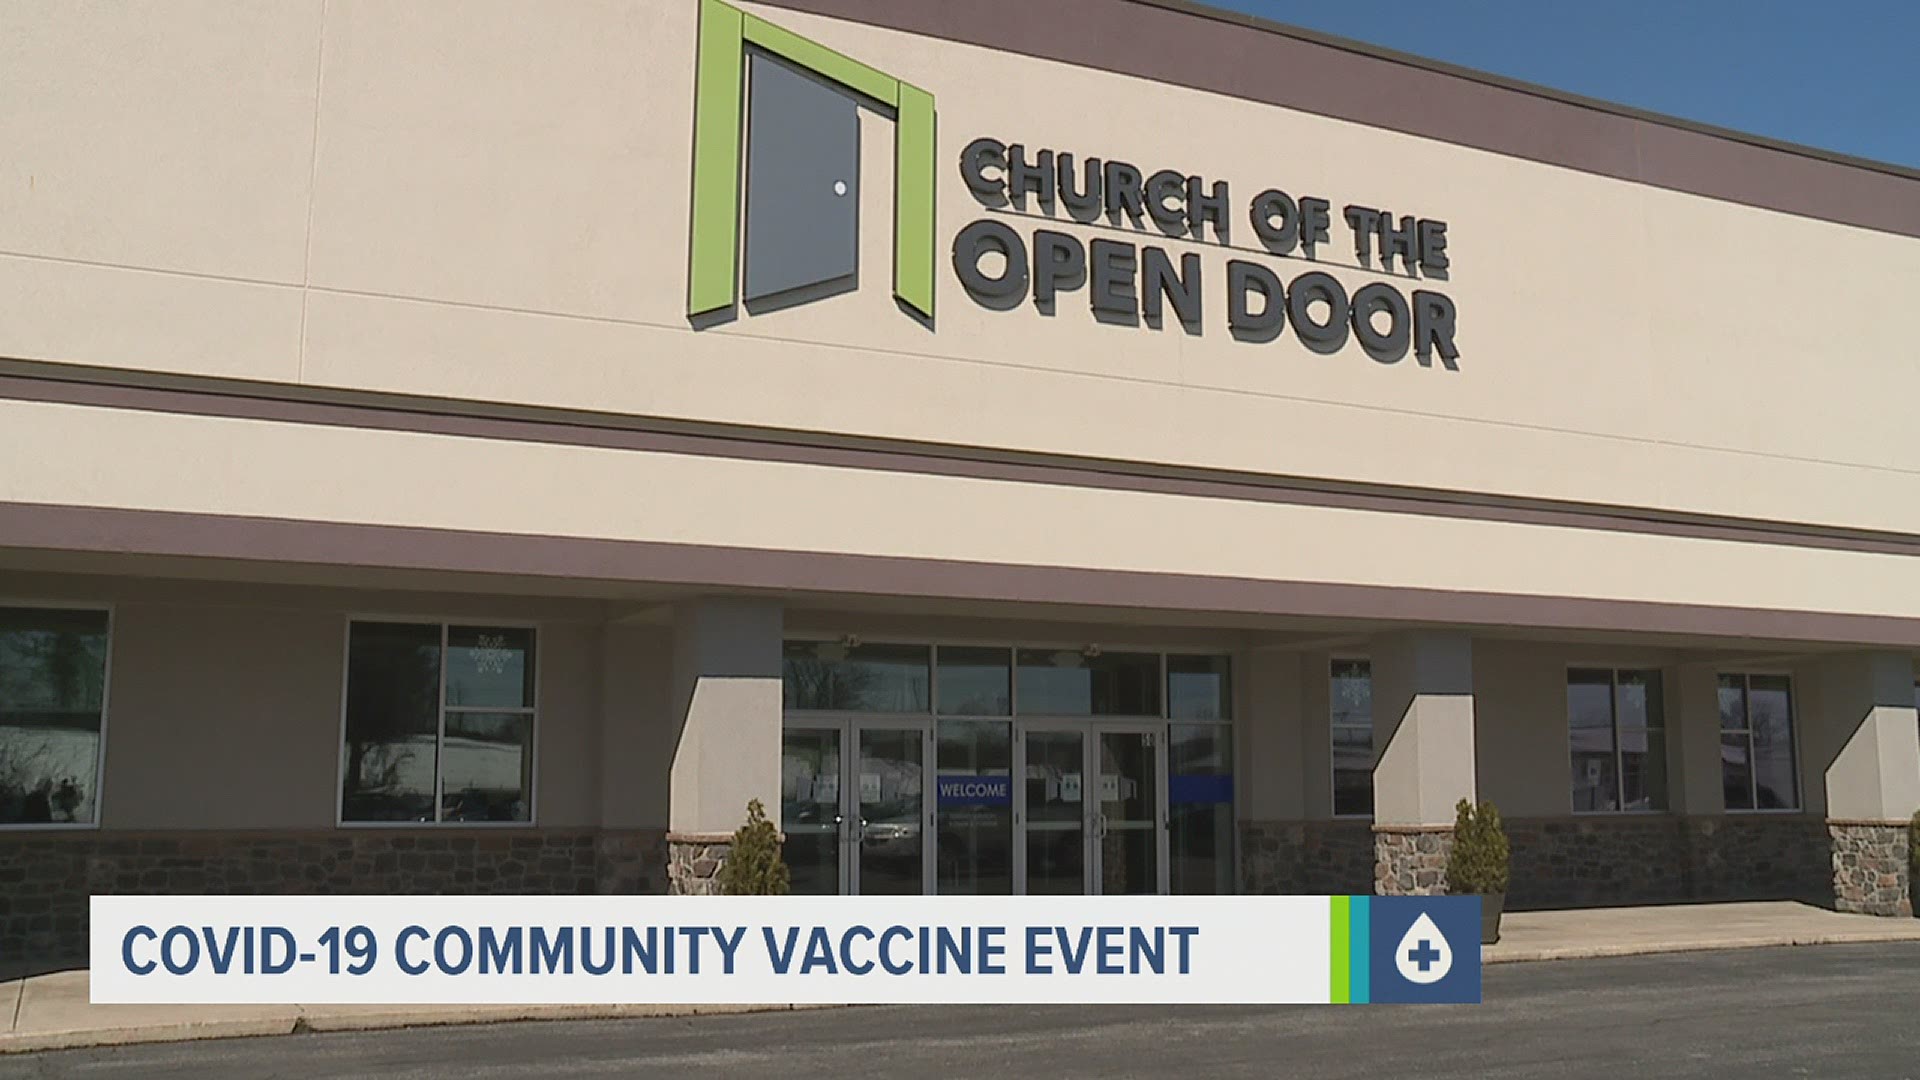 The clinic will be held inside the Church of the Open Door in the 4000 block of East Market Street in York  from Feb. 24 through Feb. 26, according to Walmart.